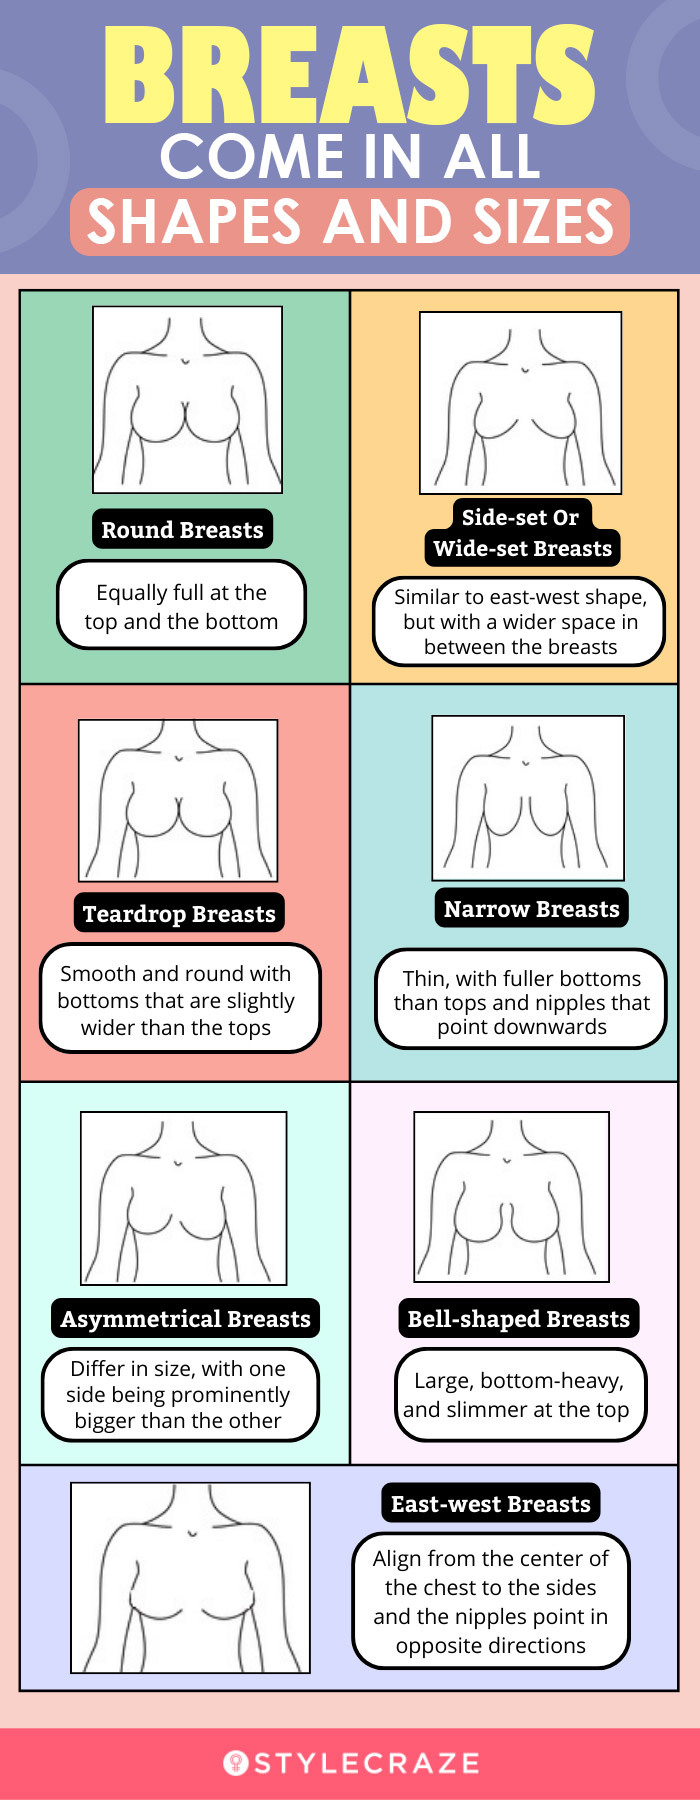 The Greatest Guide To Can You Make Your Breast Grow Bigger Overnight?